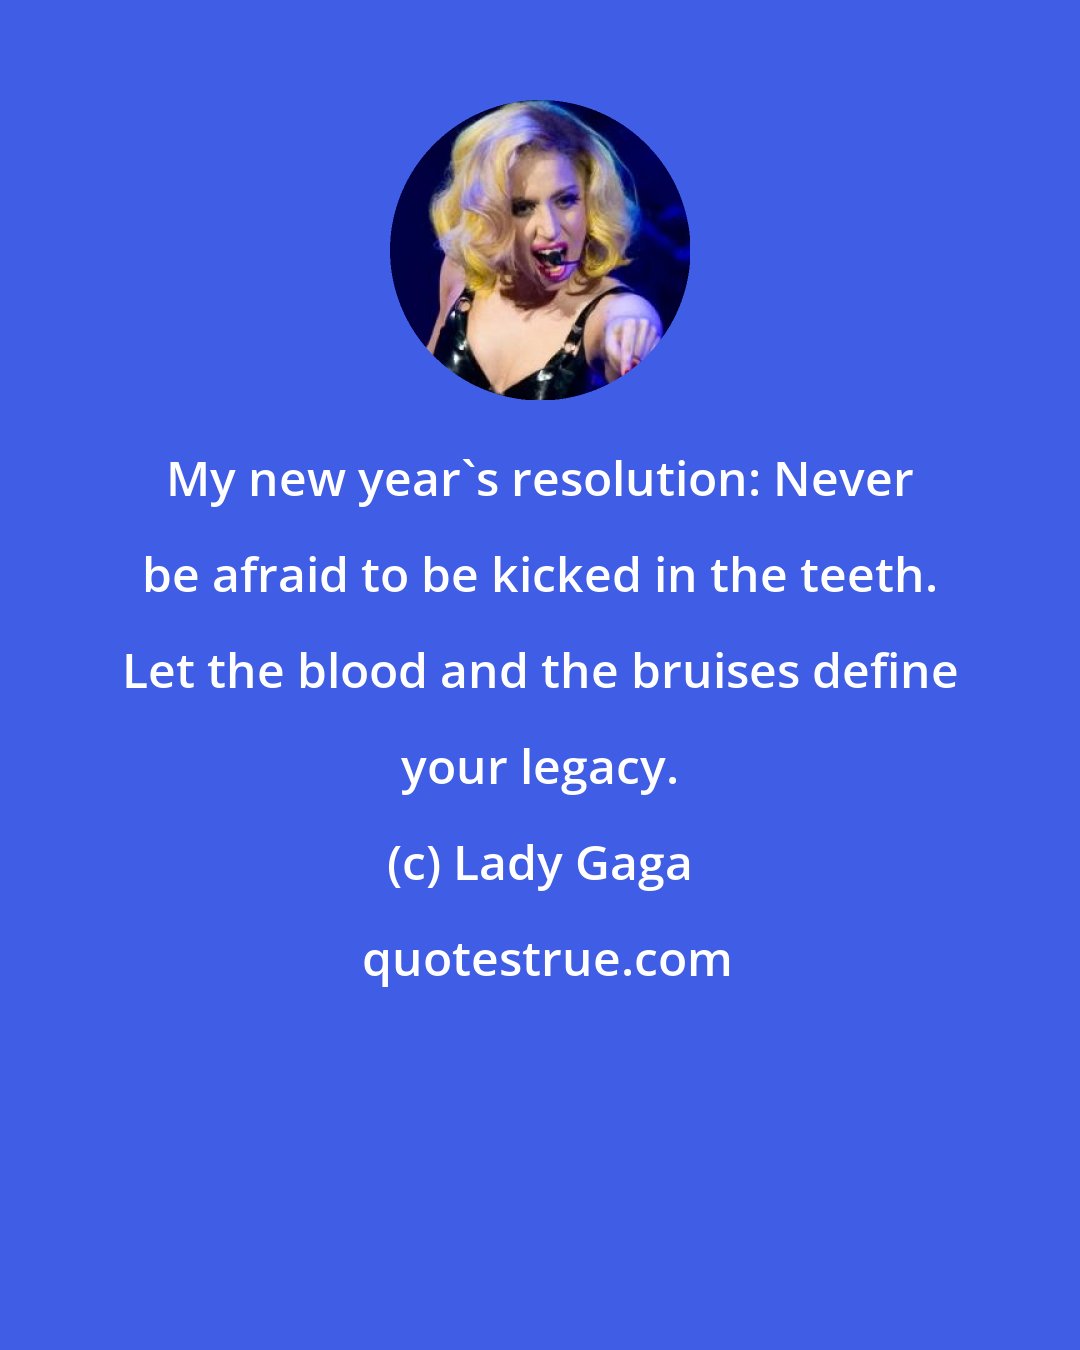 Lady Gaga: My new year's resolution: Never be afraid to be kicked in the teeth. Let the blood and the bruises define your legacy.